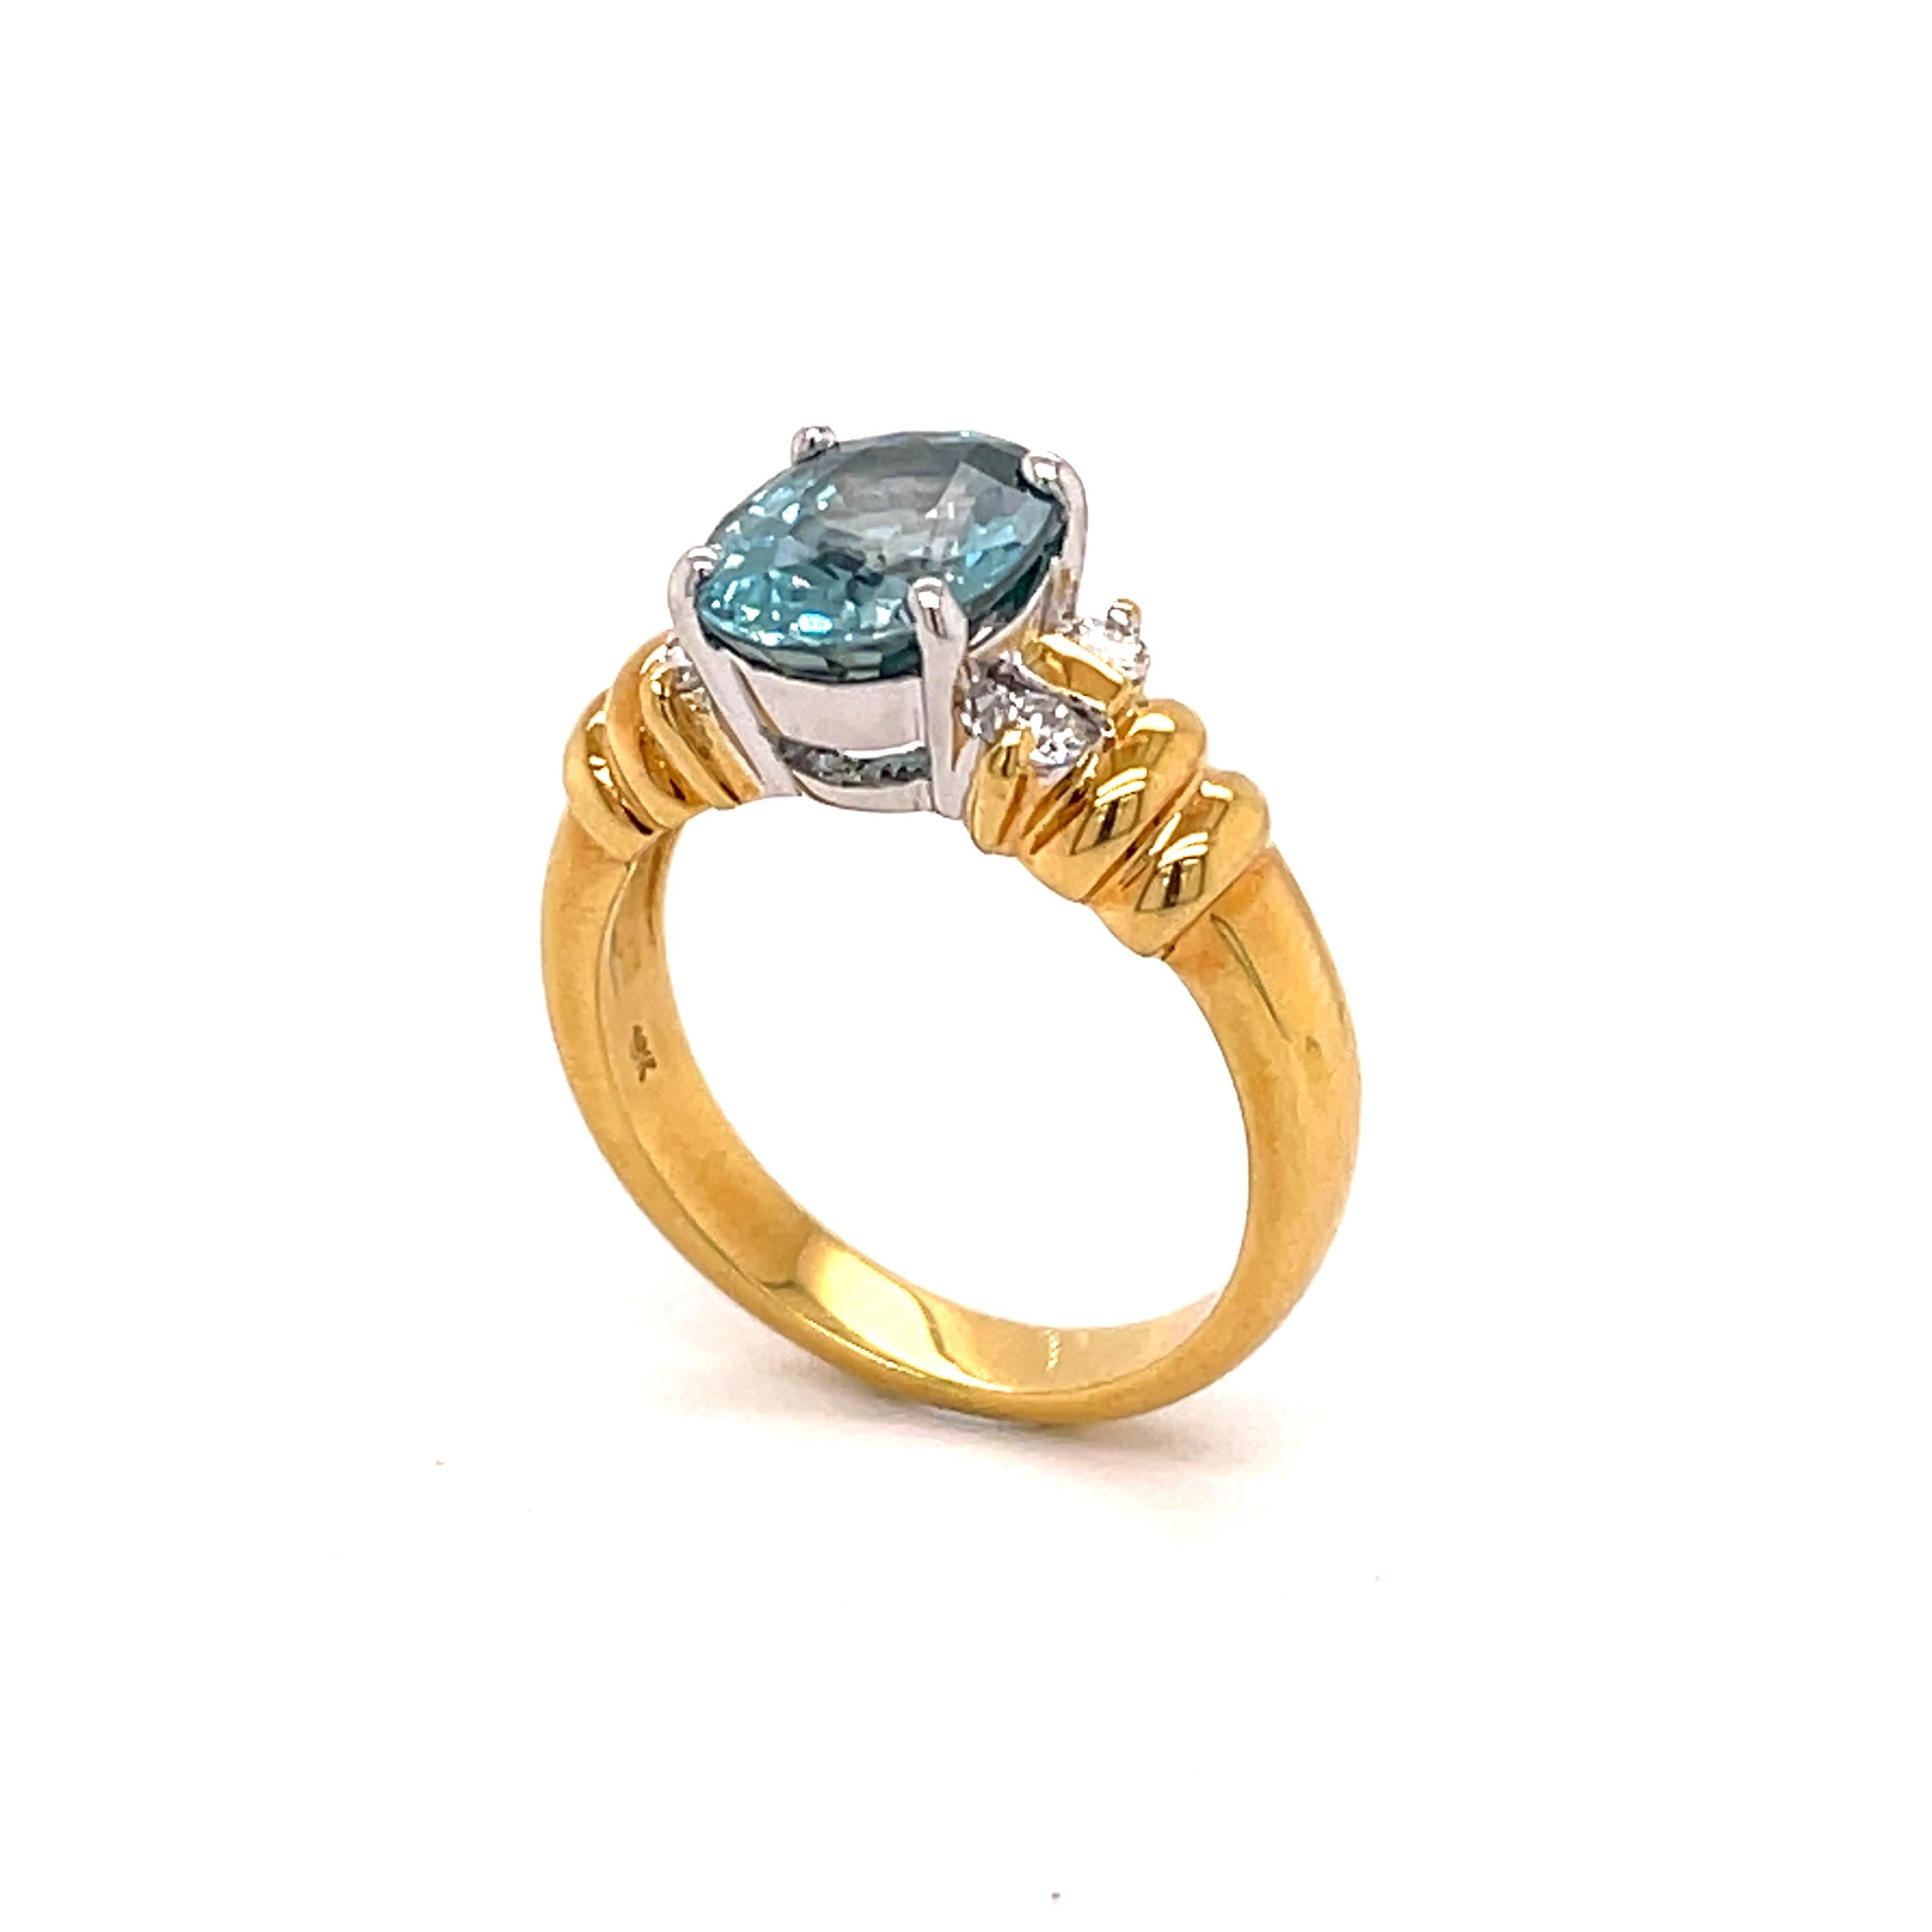 This December birthstone ring of blue Zircon has a Cambodian cut oval stone that is 10 x 8 mm and weighs 4.70 carats. We usually re-cut all of our blue Zircons stones, but this particular one faced up well. 
It has 2 Diamonds on each side (total 4)